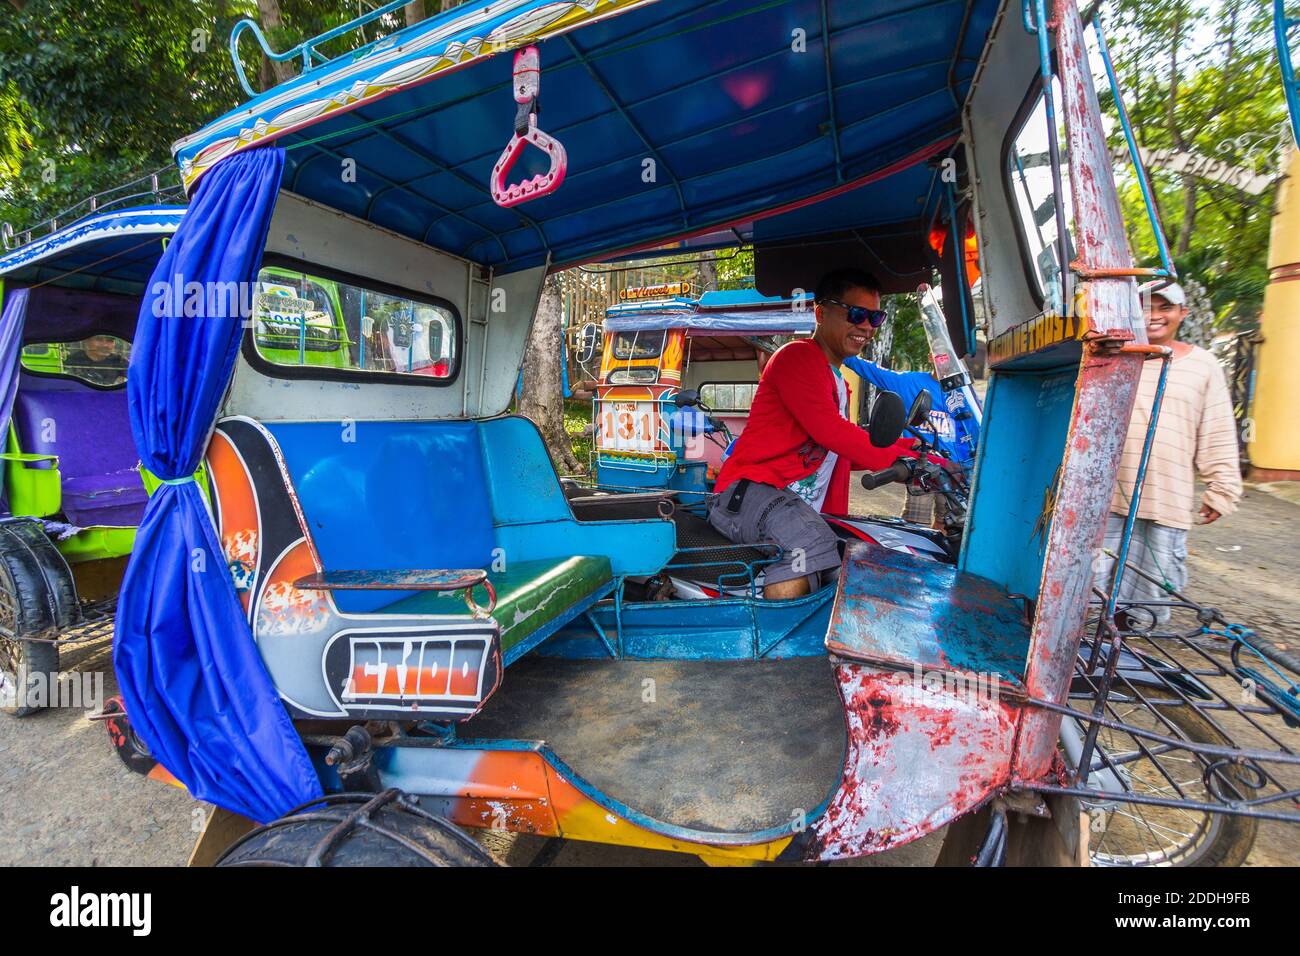 A custom built tricycle, a local passenger vehicle, in Mindanao, Philippines Stock Photo